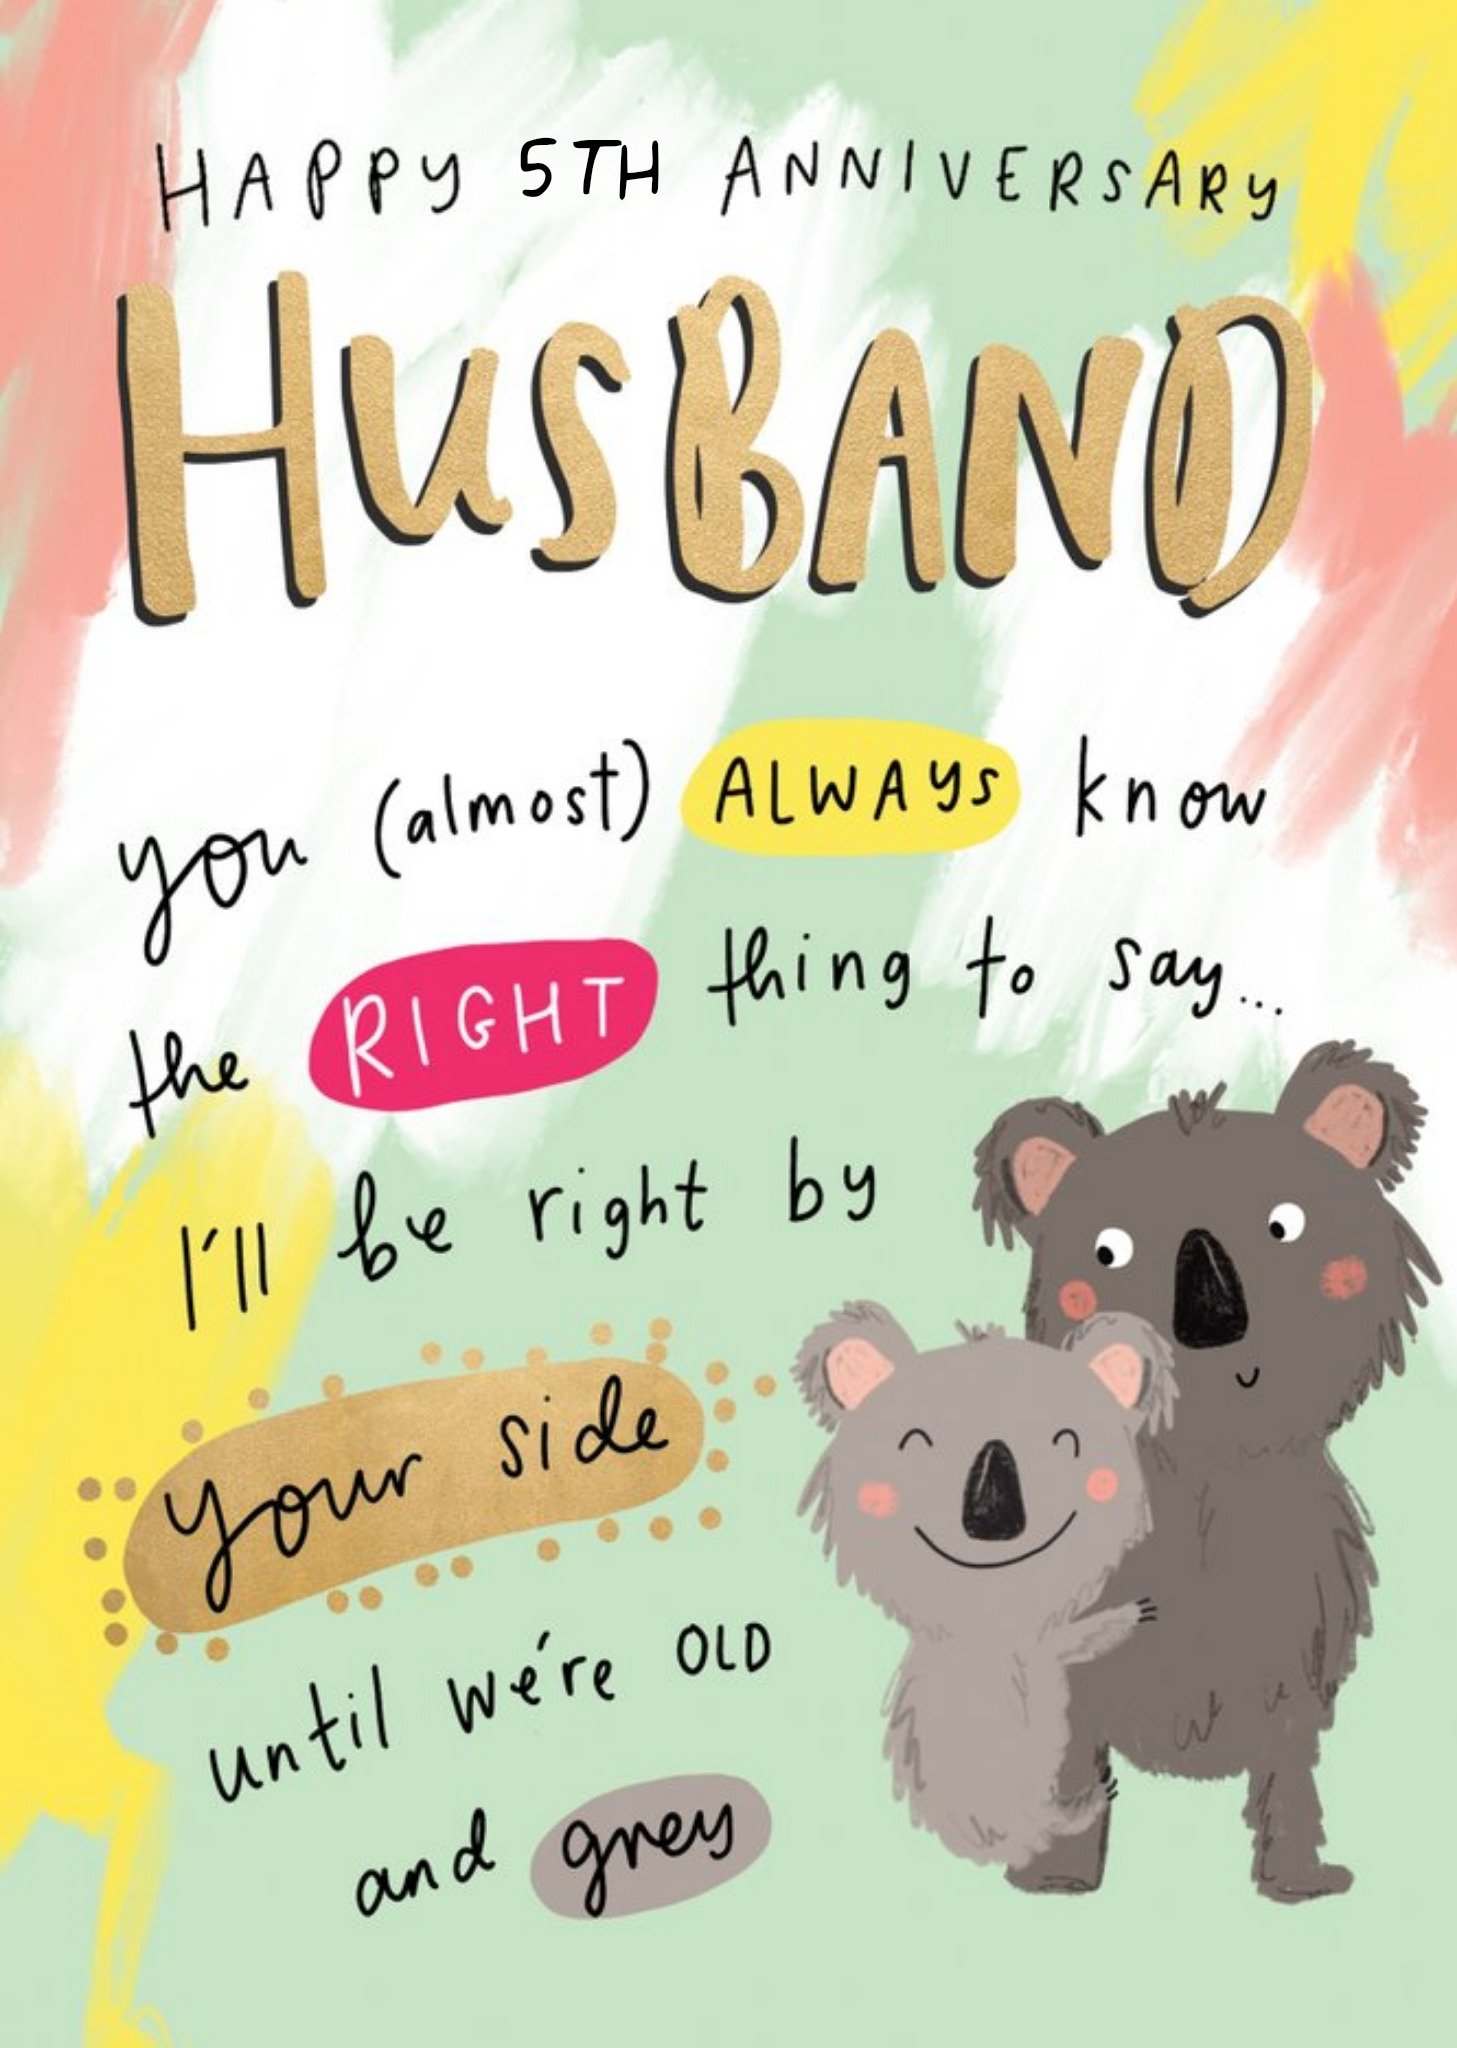 Other Koalathe Happy News - Couple Right By Your Side 5th Anniversary Card For Husband Ecard